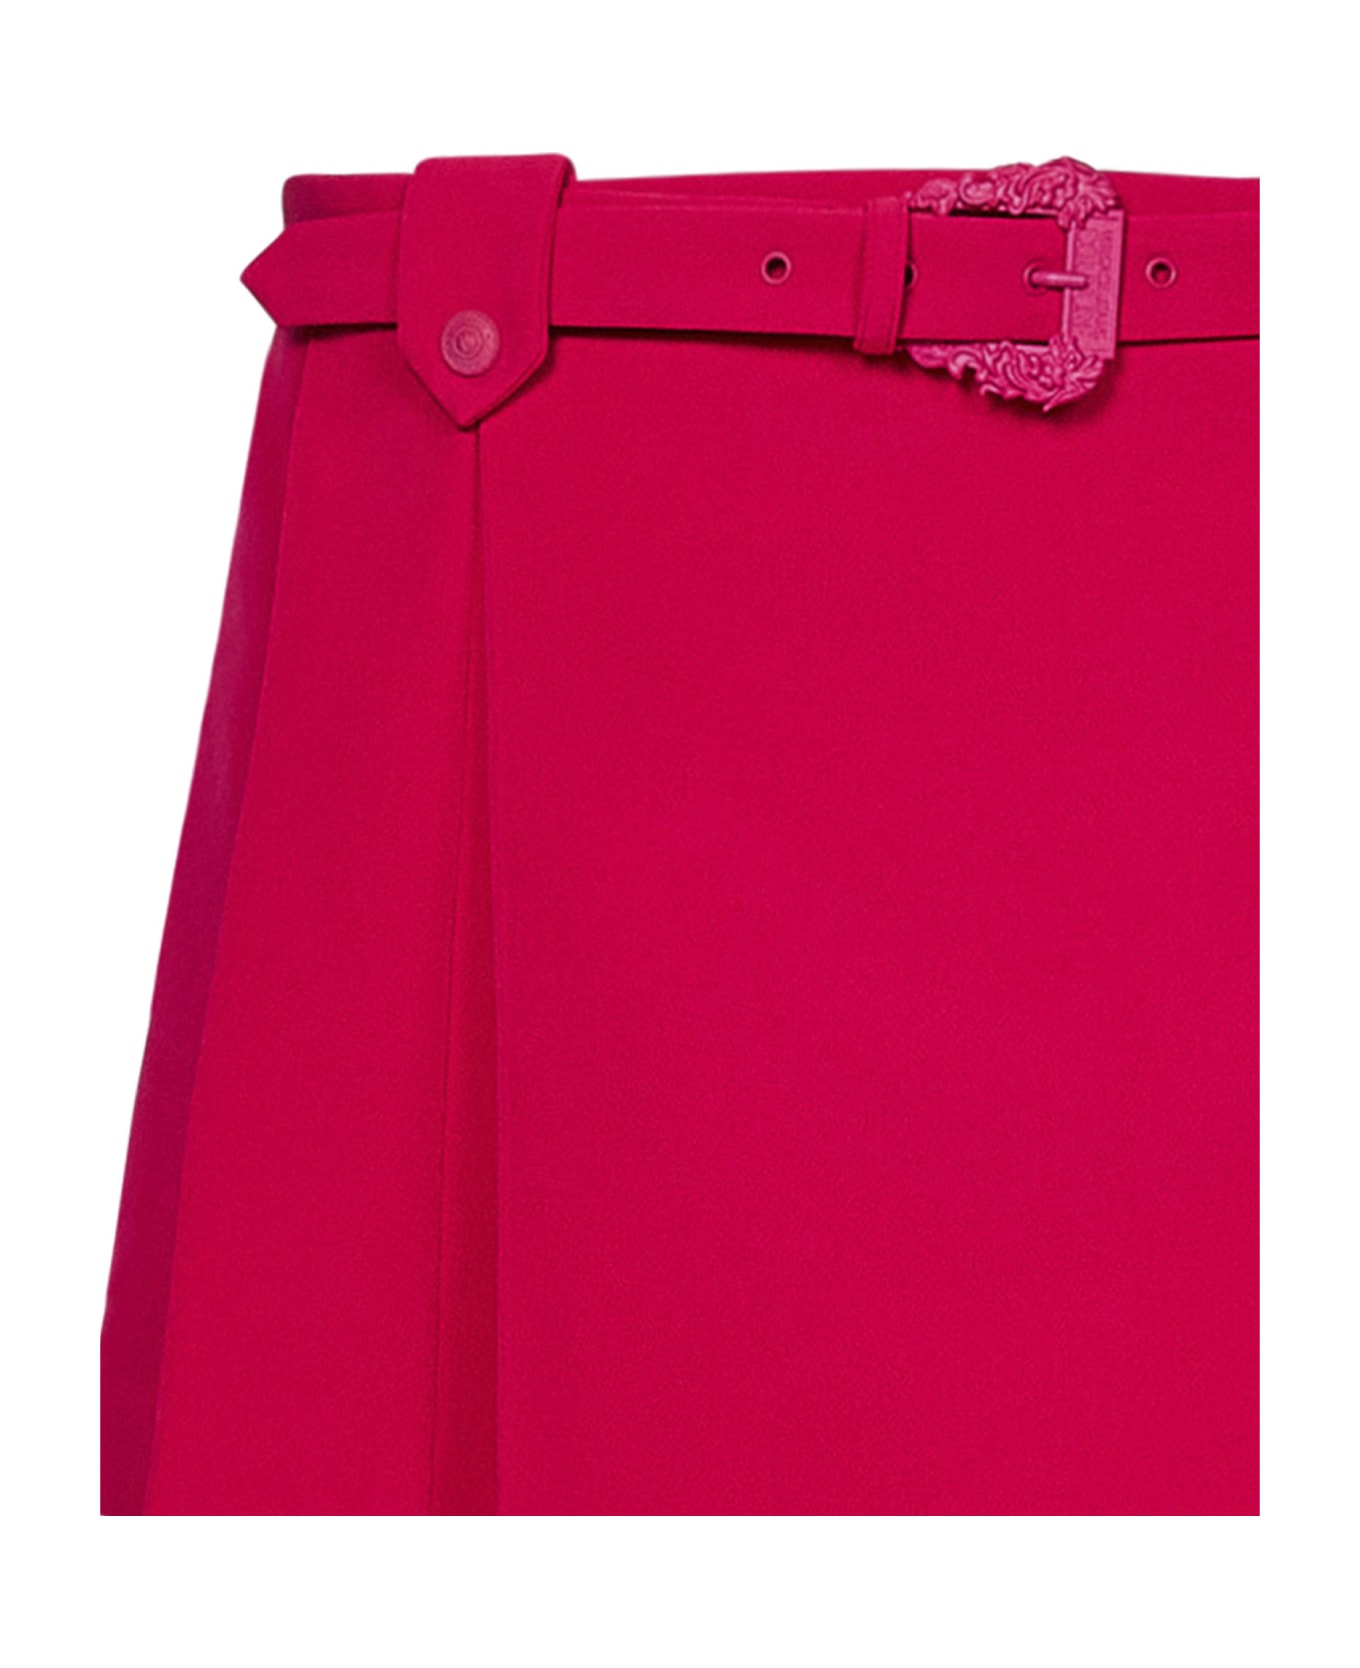 Versace Jeans Couture Skirt - Hot Pink